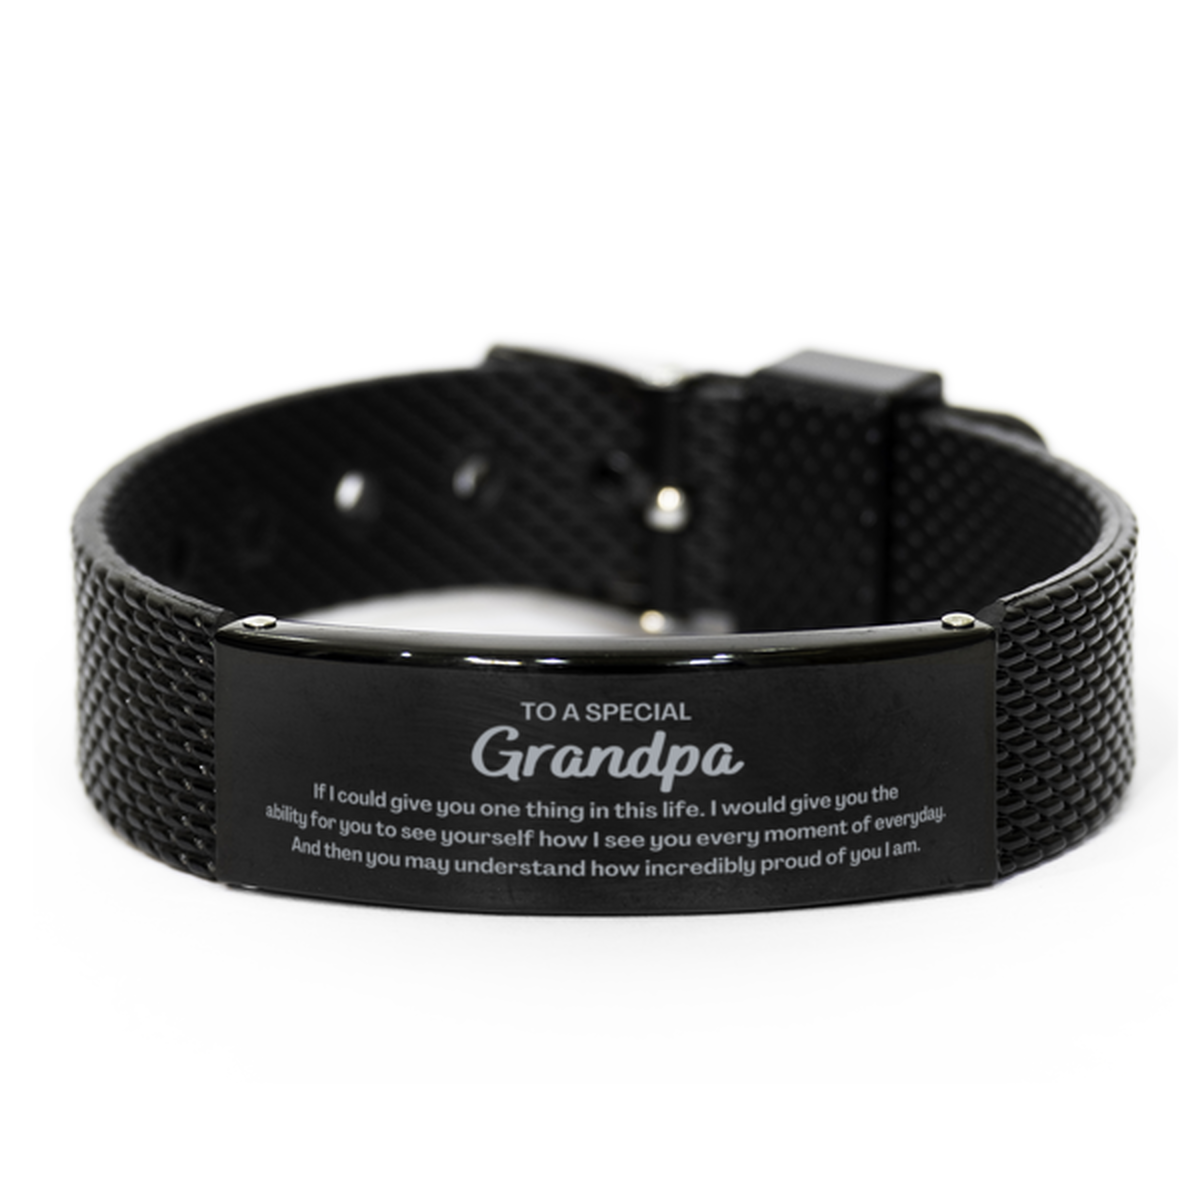 To My Grandpa Black Shark Mesh Bracelet, Gifts For Grandpa Engraved, Inspirational Gifts for Christmas Birthday, Epic Gifts for Grandpa To A Special Grandpa how incredibly proud of you I am